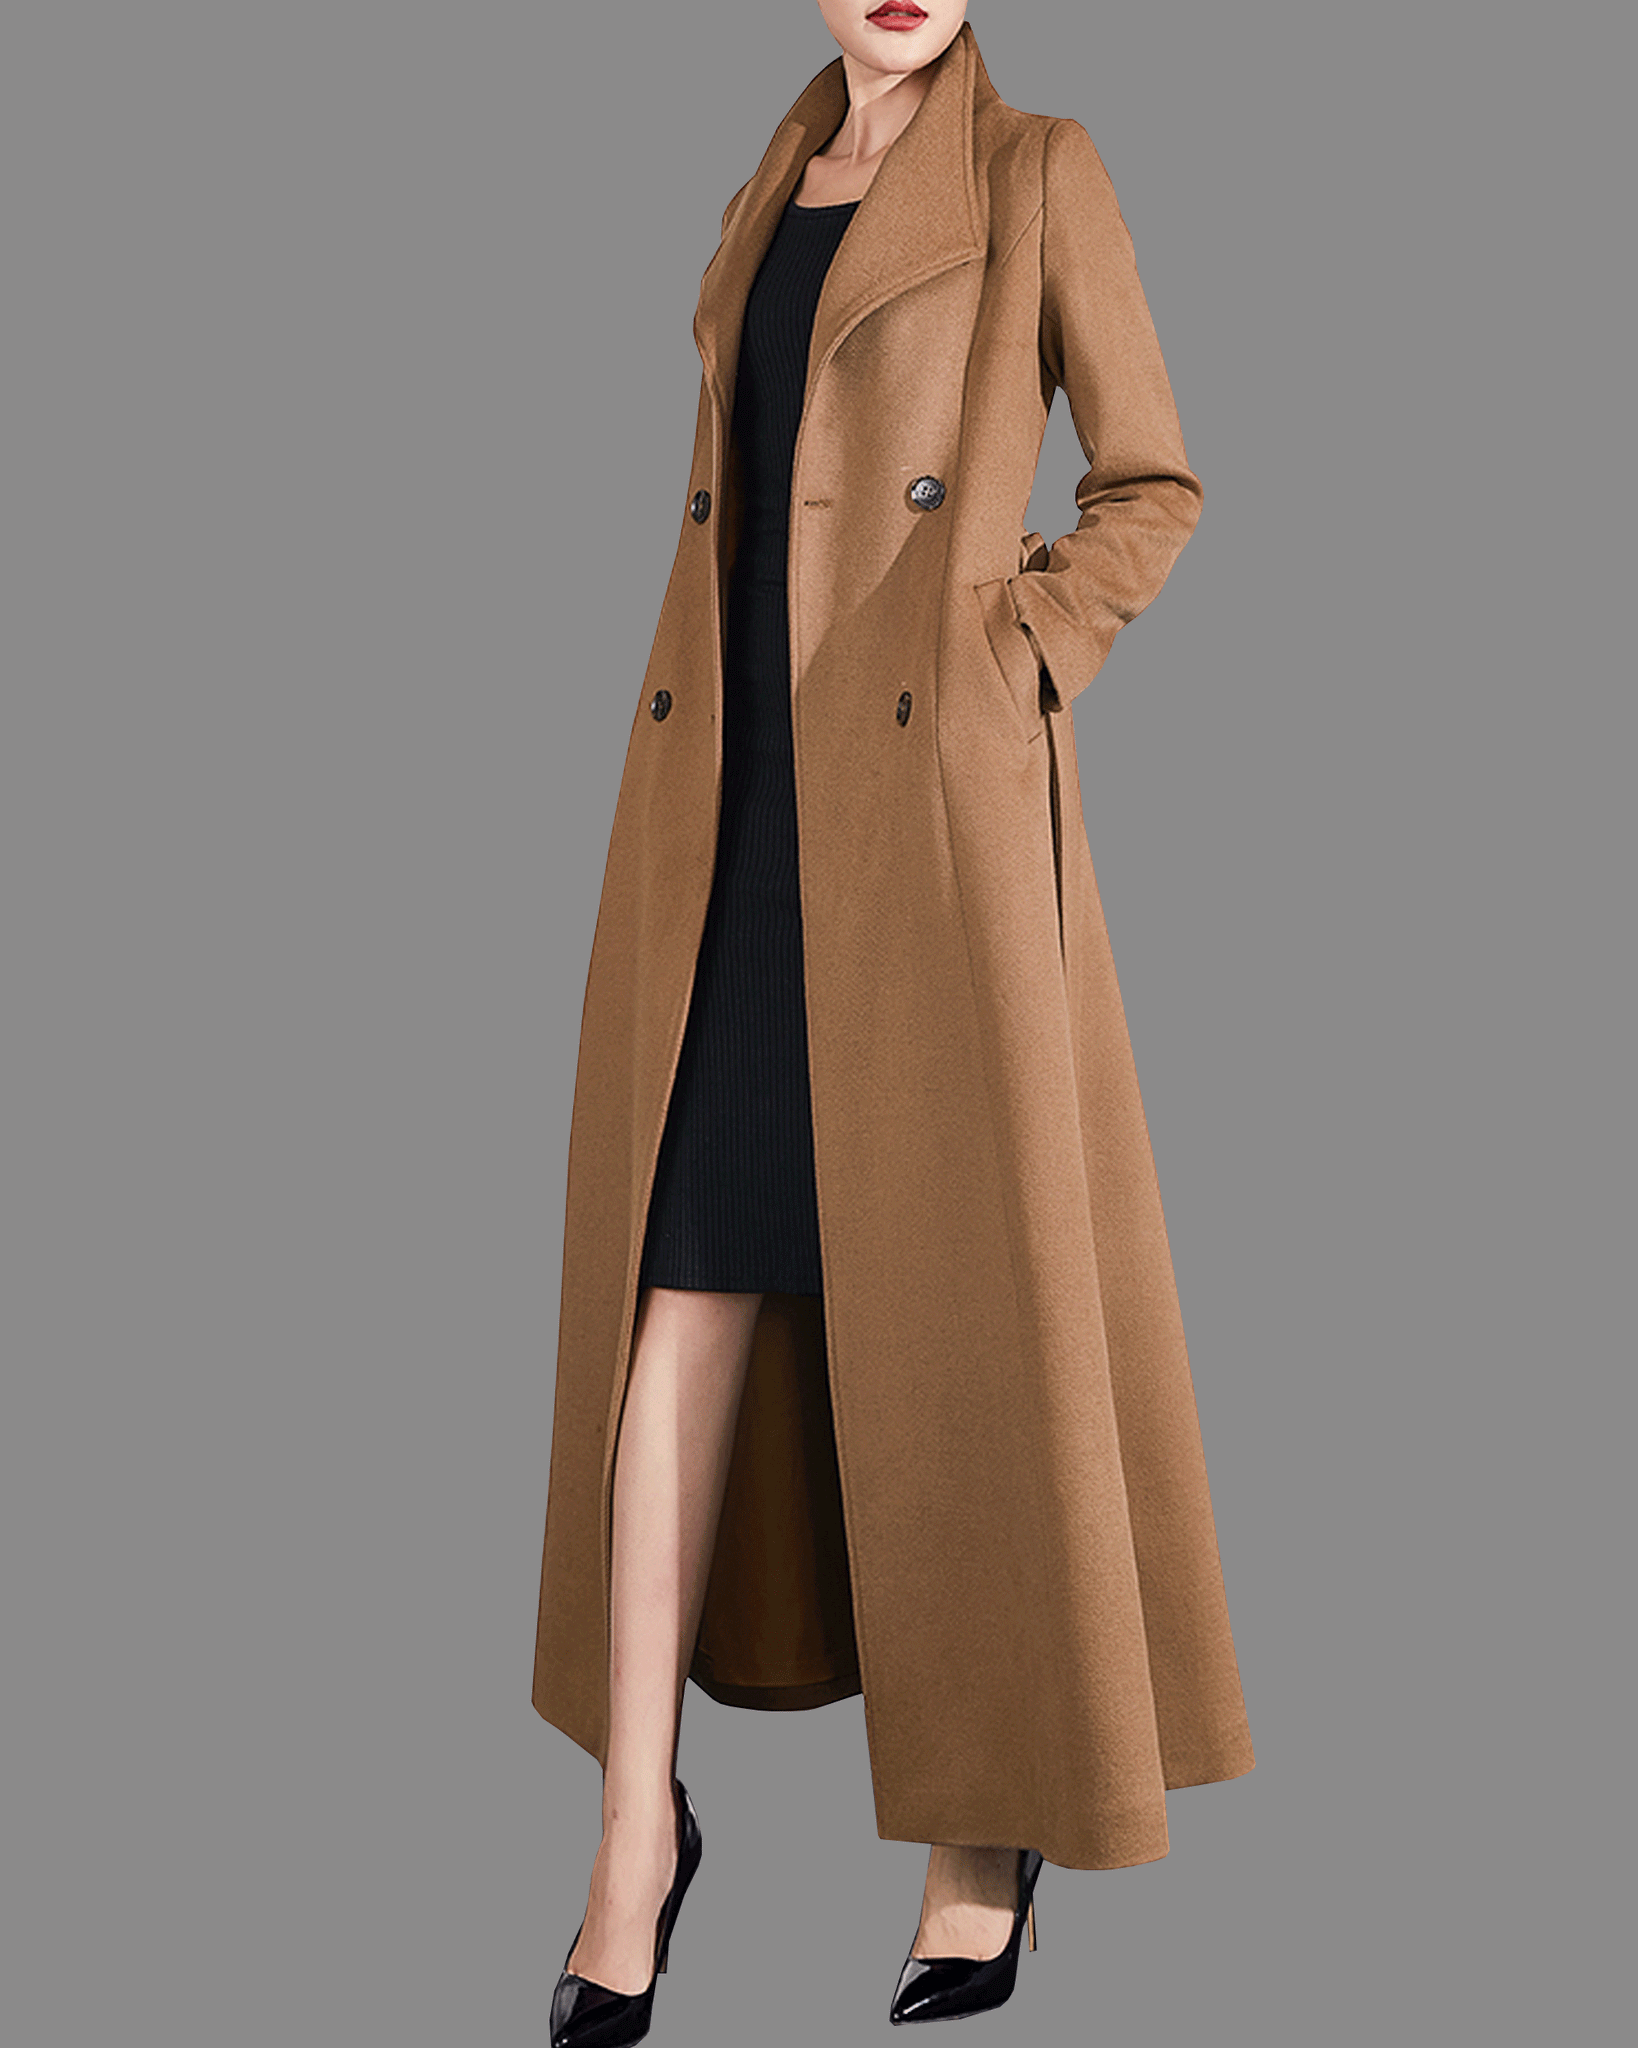 Women's Maxi Coat - Water-Resistant, Polar Fleece Lined, and Detachabl –  The Whole Shebang